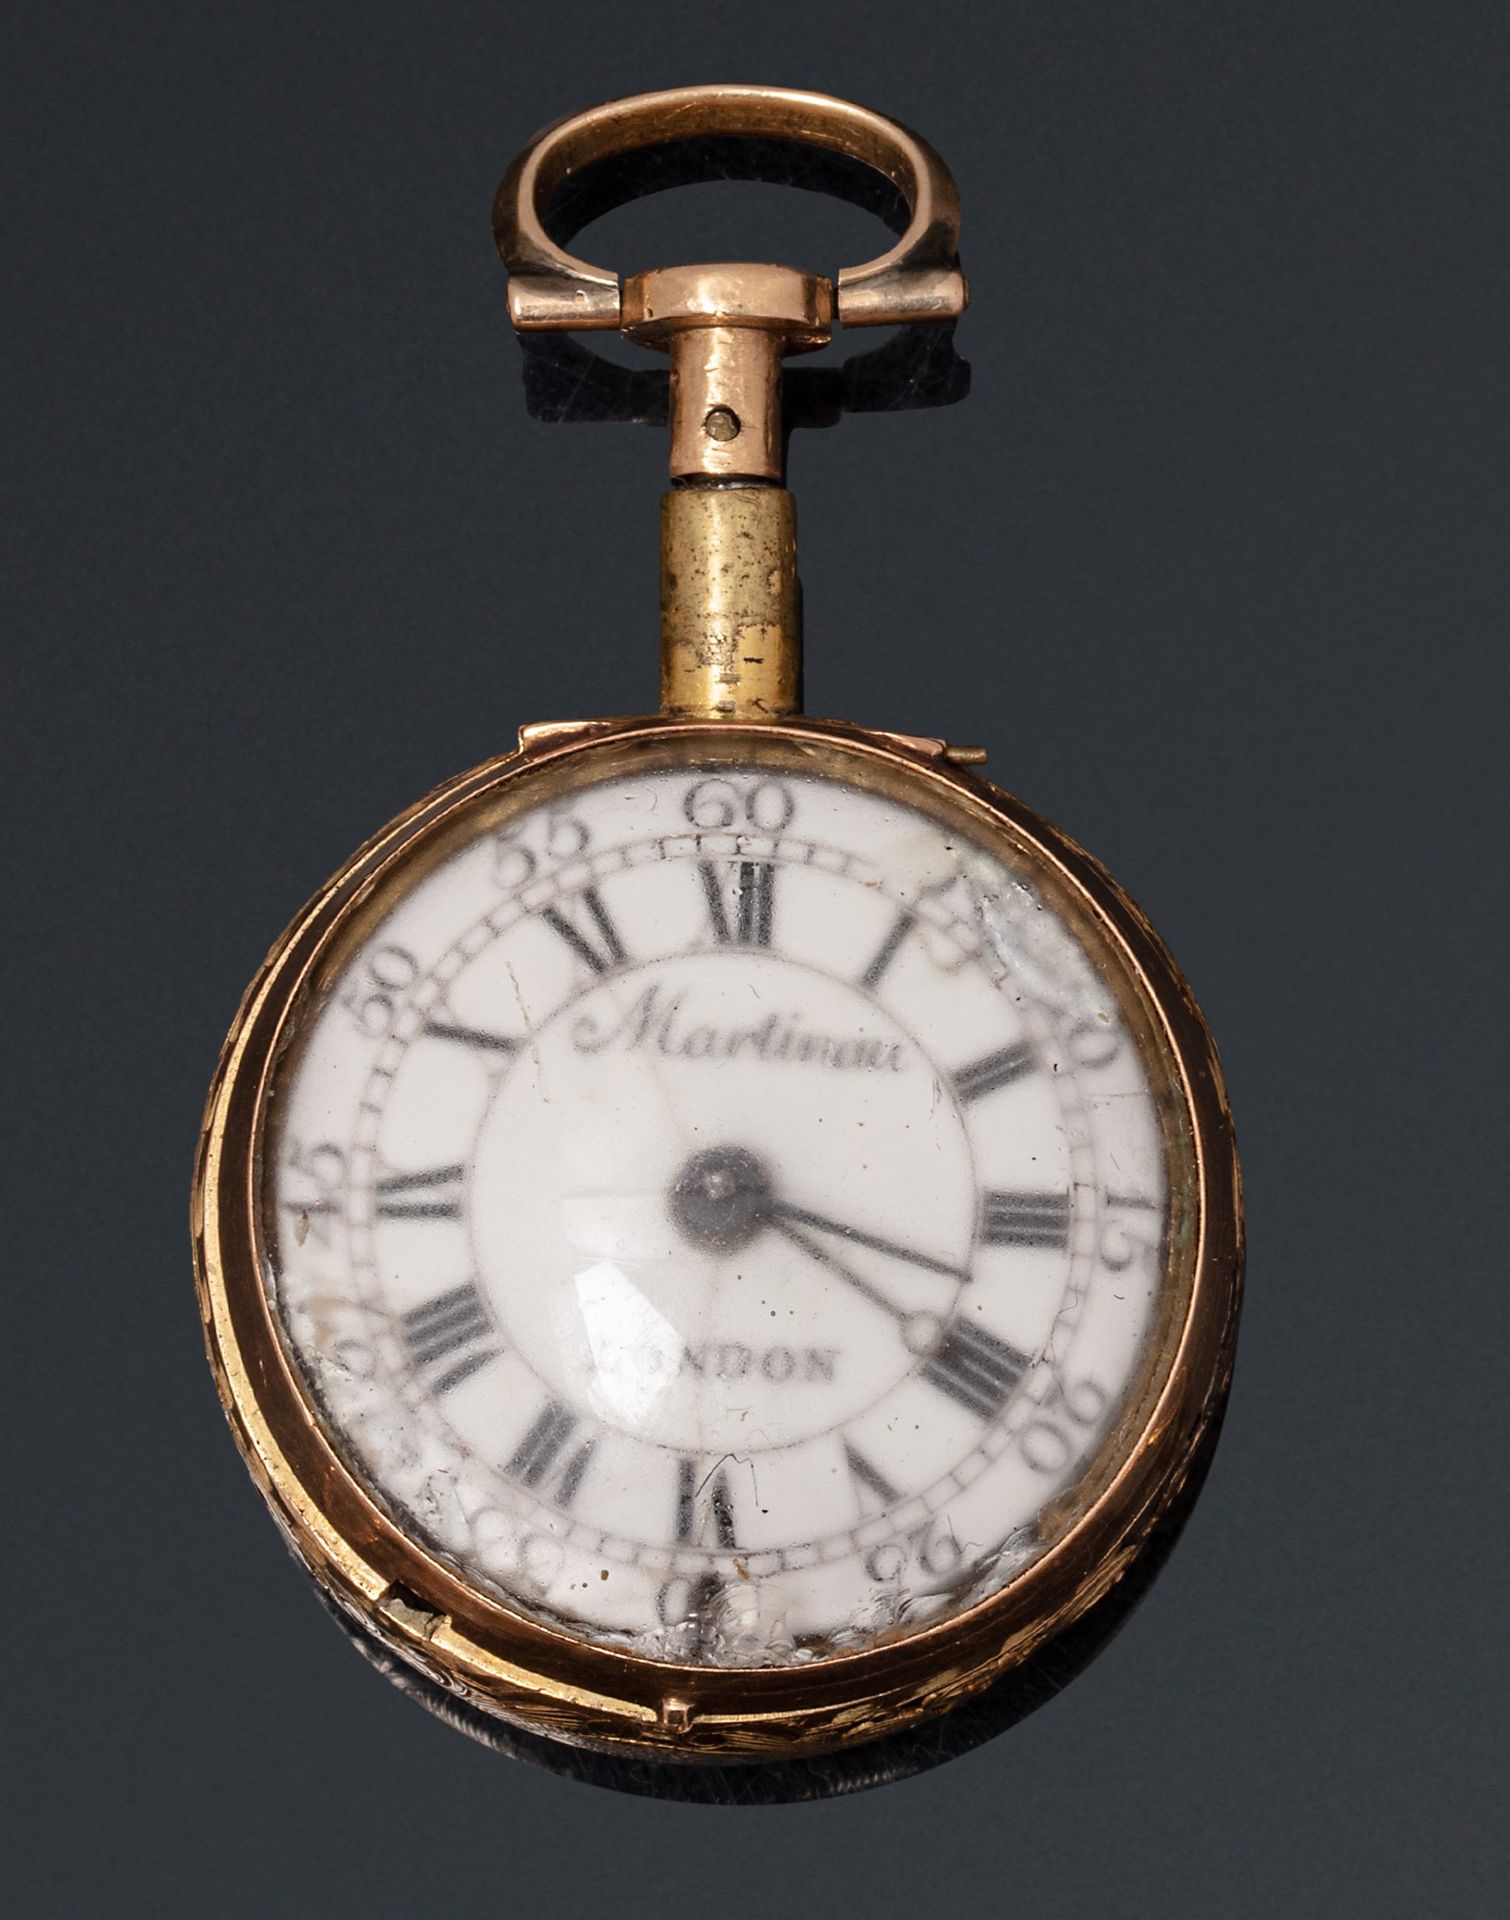 Null MARTINEAU, London

Mid 18th century

Gold watch with bell for the continent&hellip;